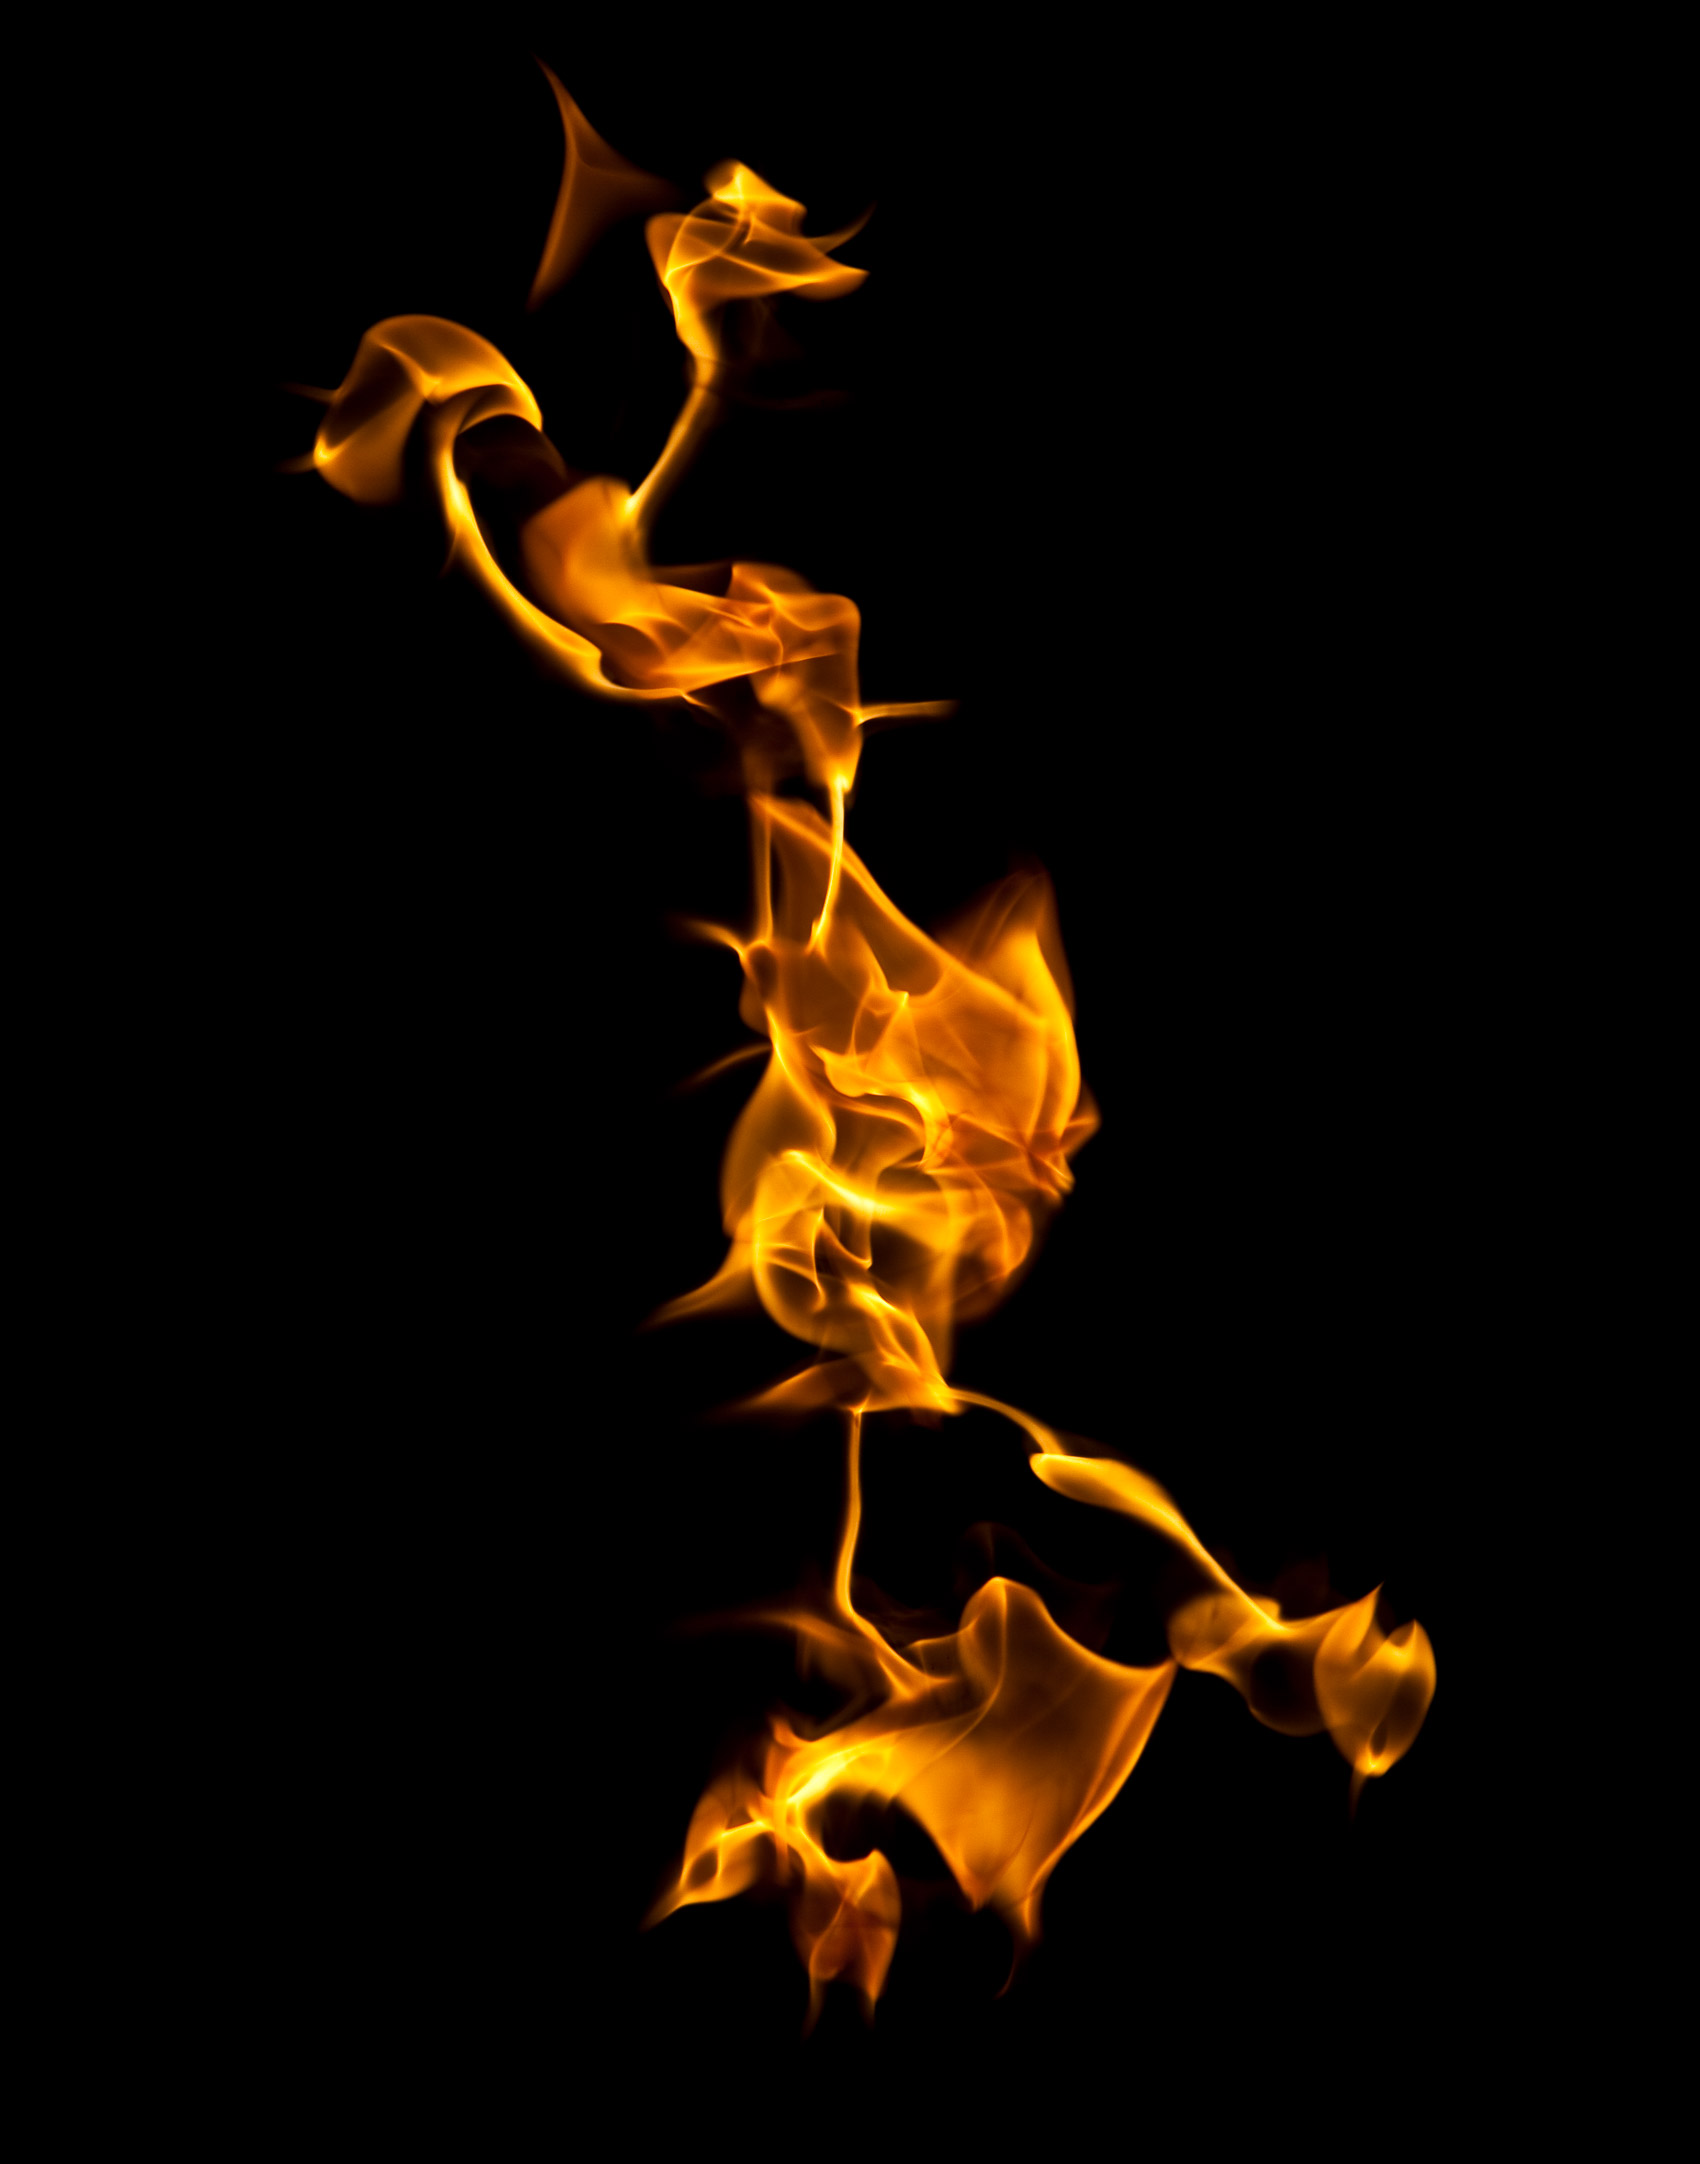 Fire Photography